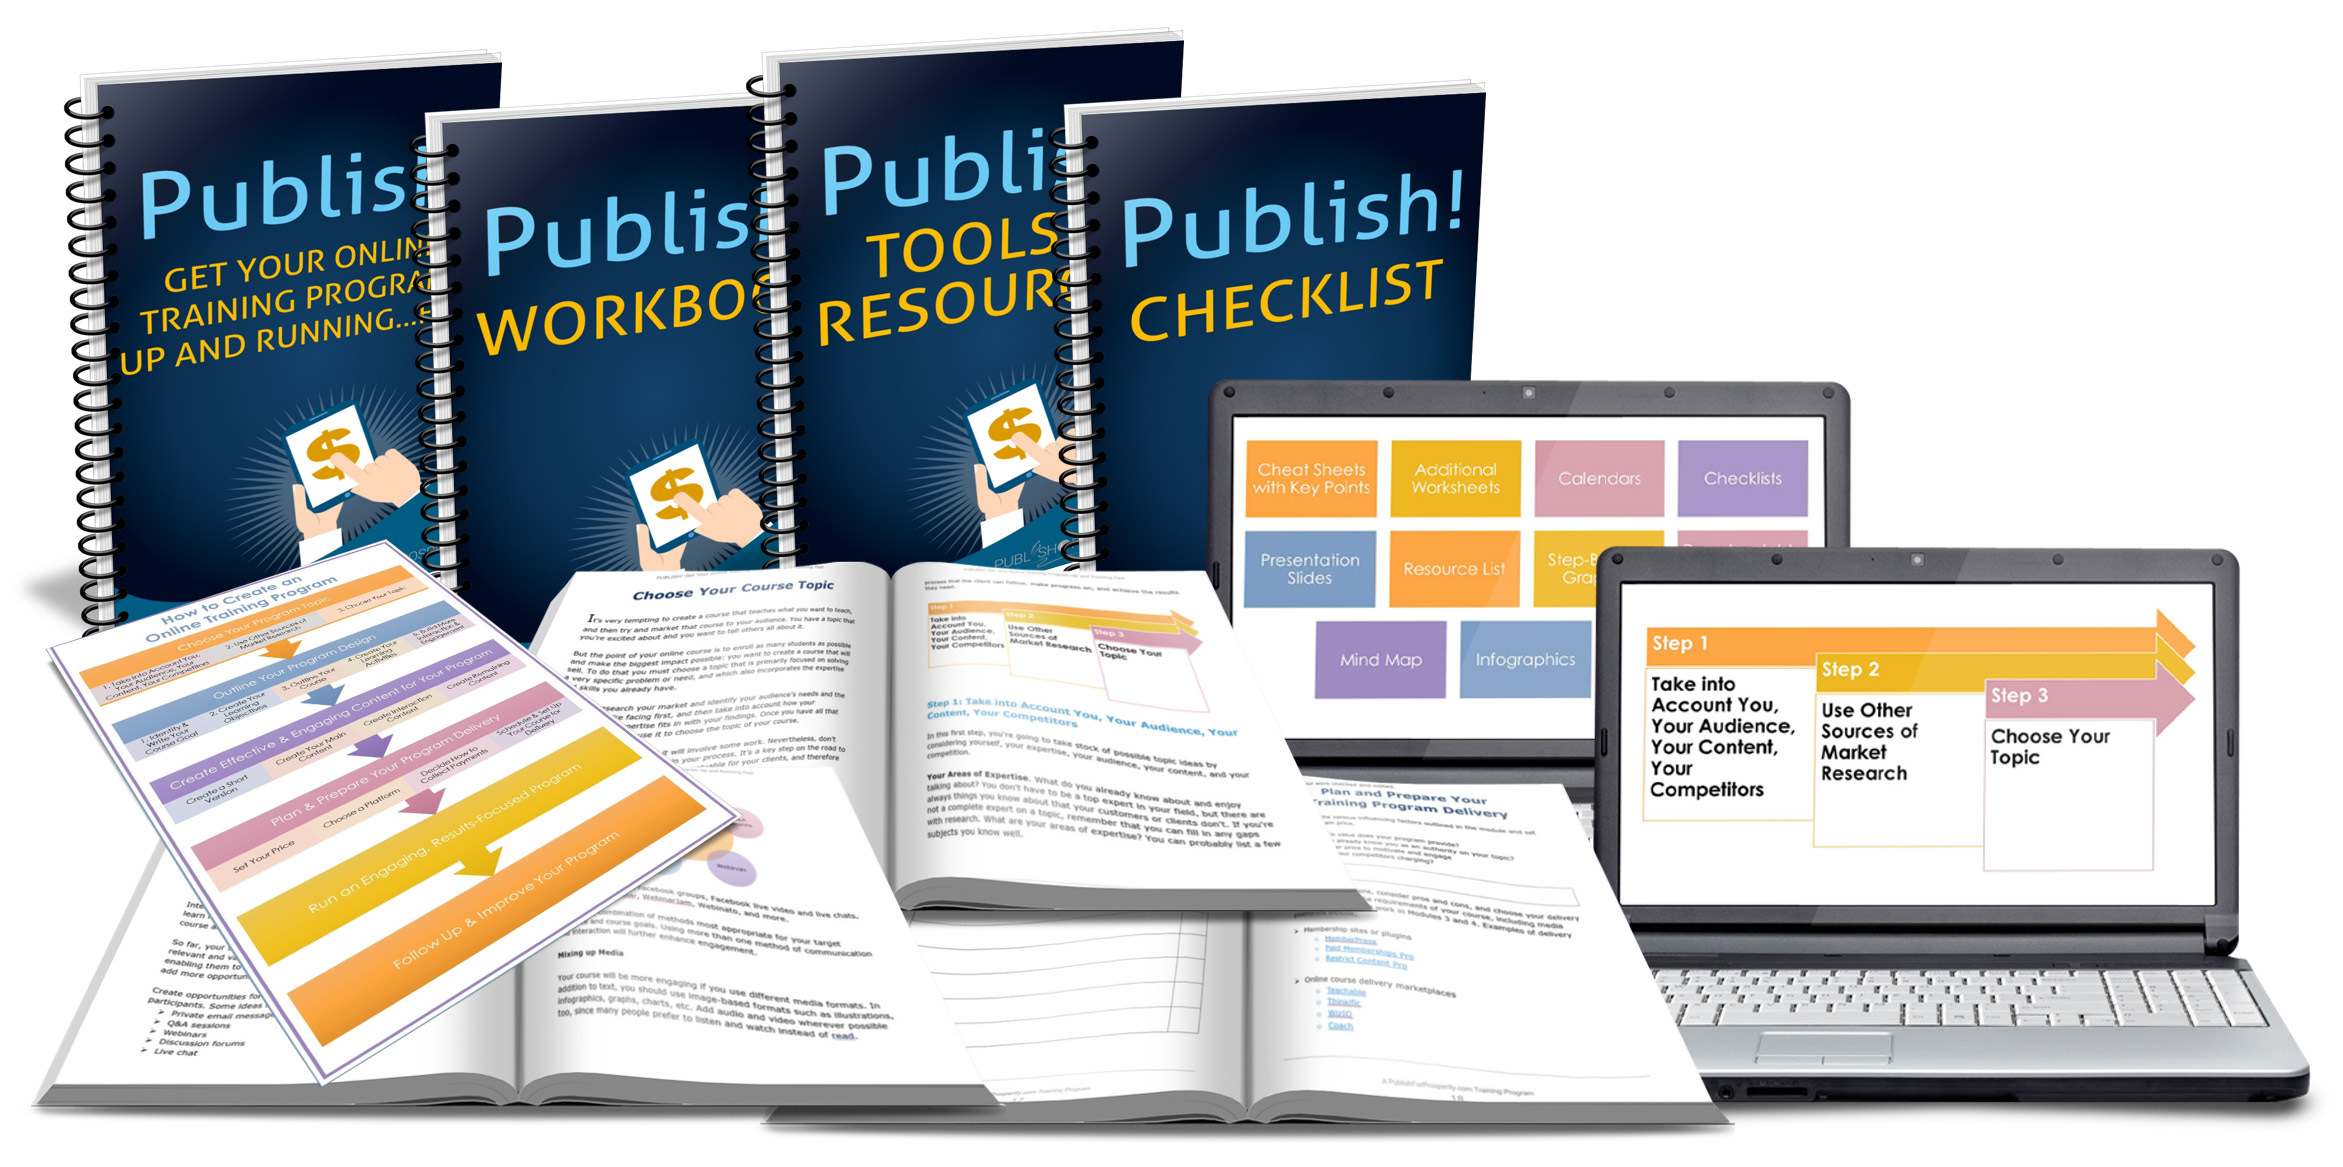 Publish! Get Your Online Training Program Up and Running...Fast